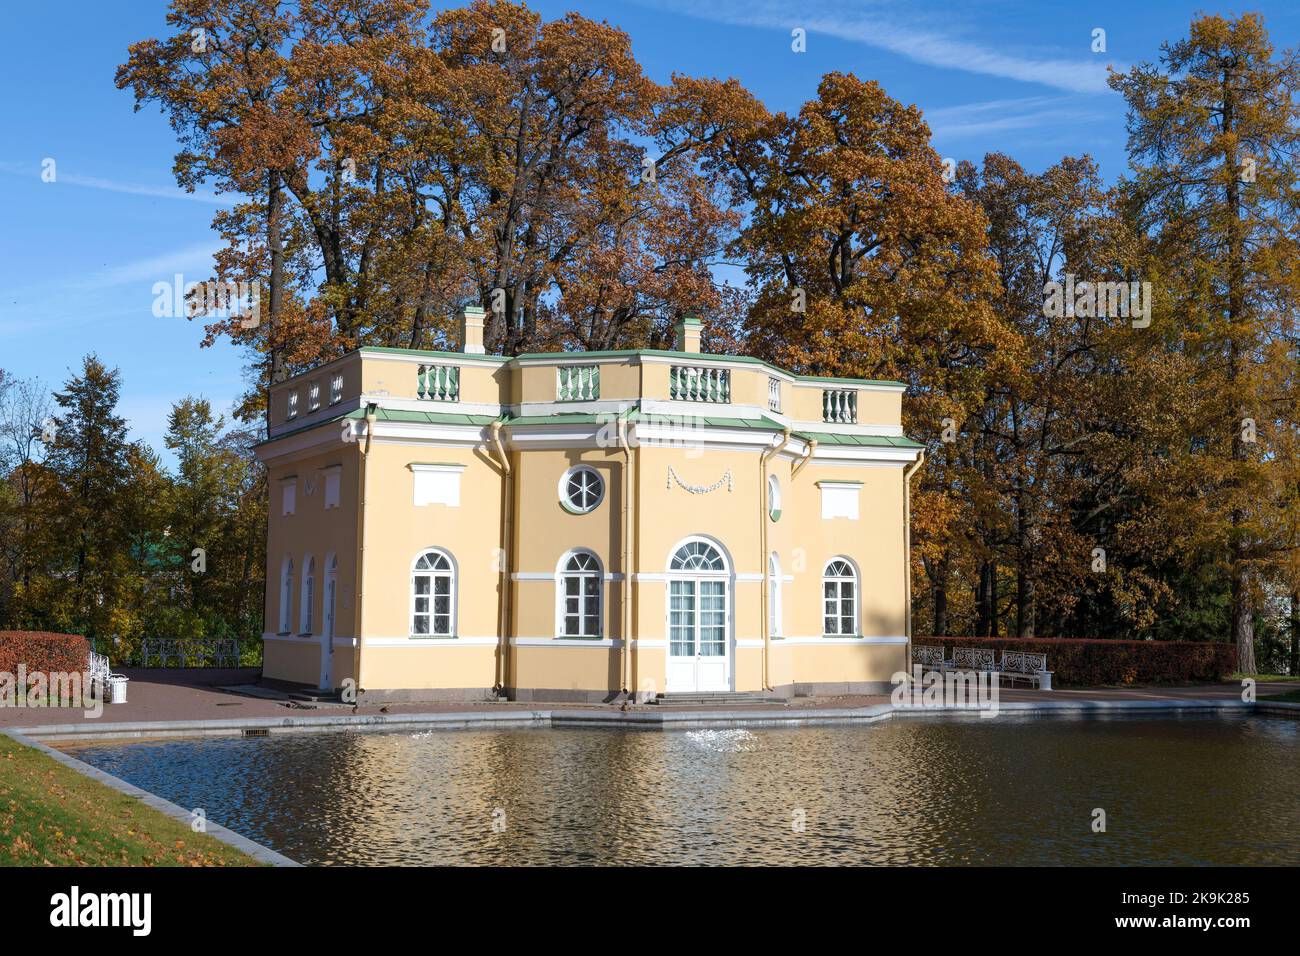 PUSHKIN, RUSSIA - OCTOBER 11, 2022: View of the ancient pavilion of 'Upper bath' (bath pavilion for members of the imperial family) on a October after Stock Photo